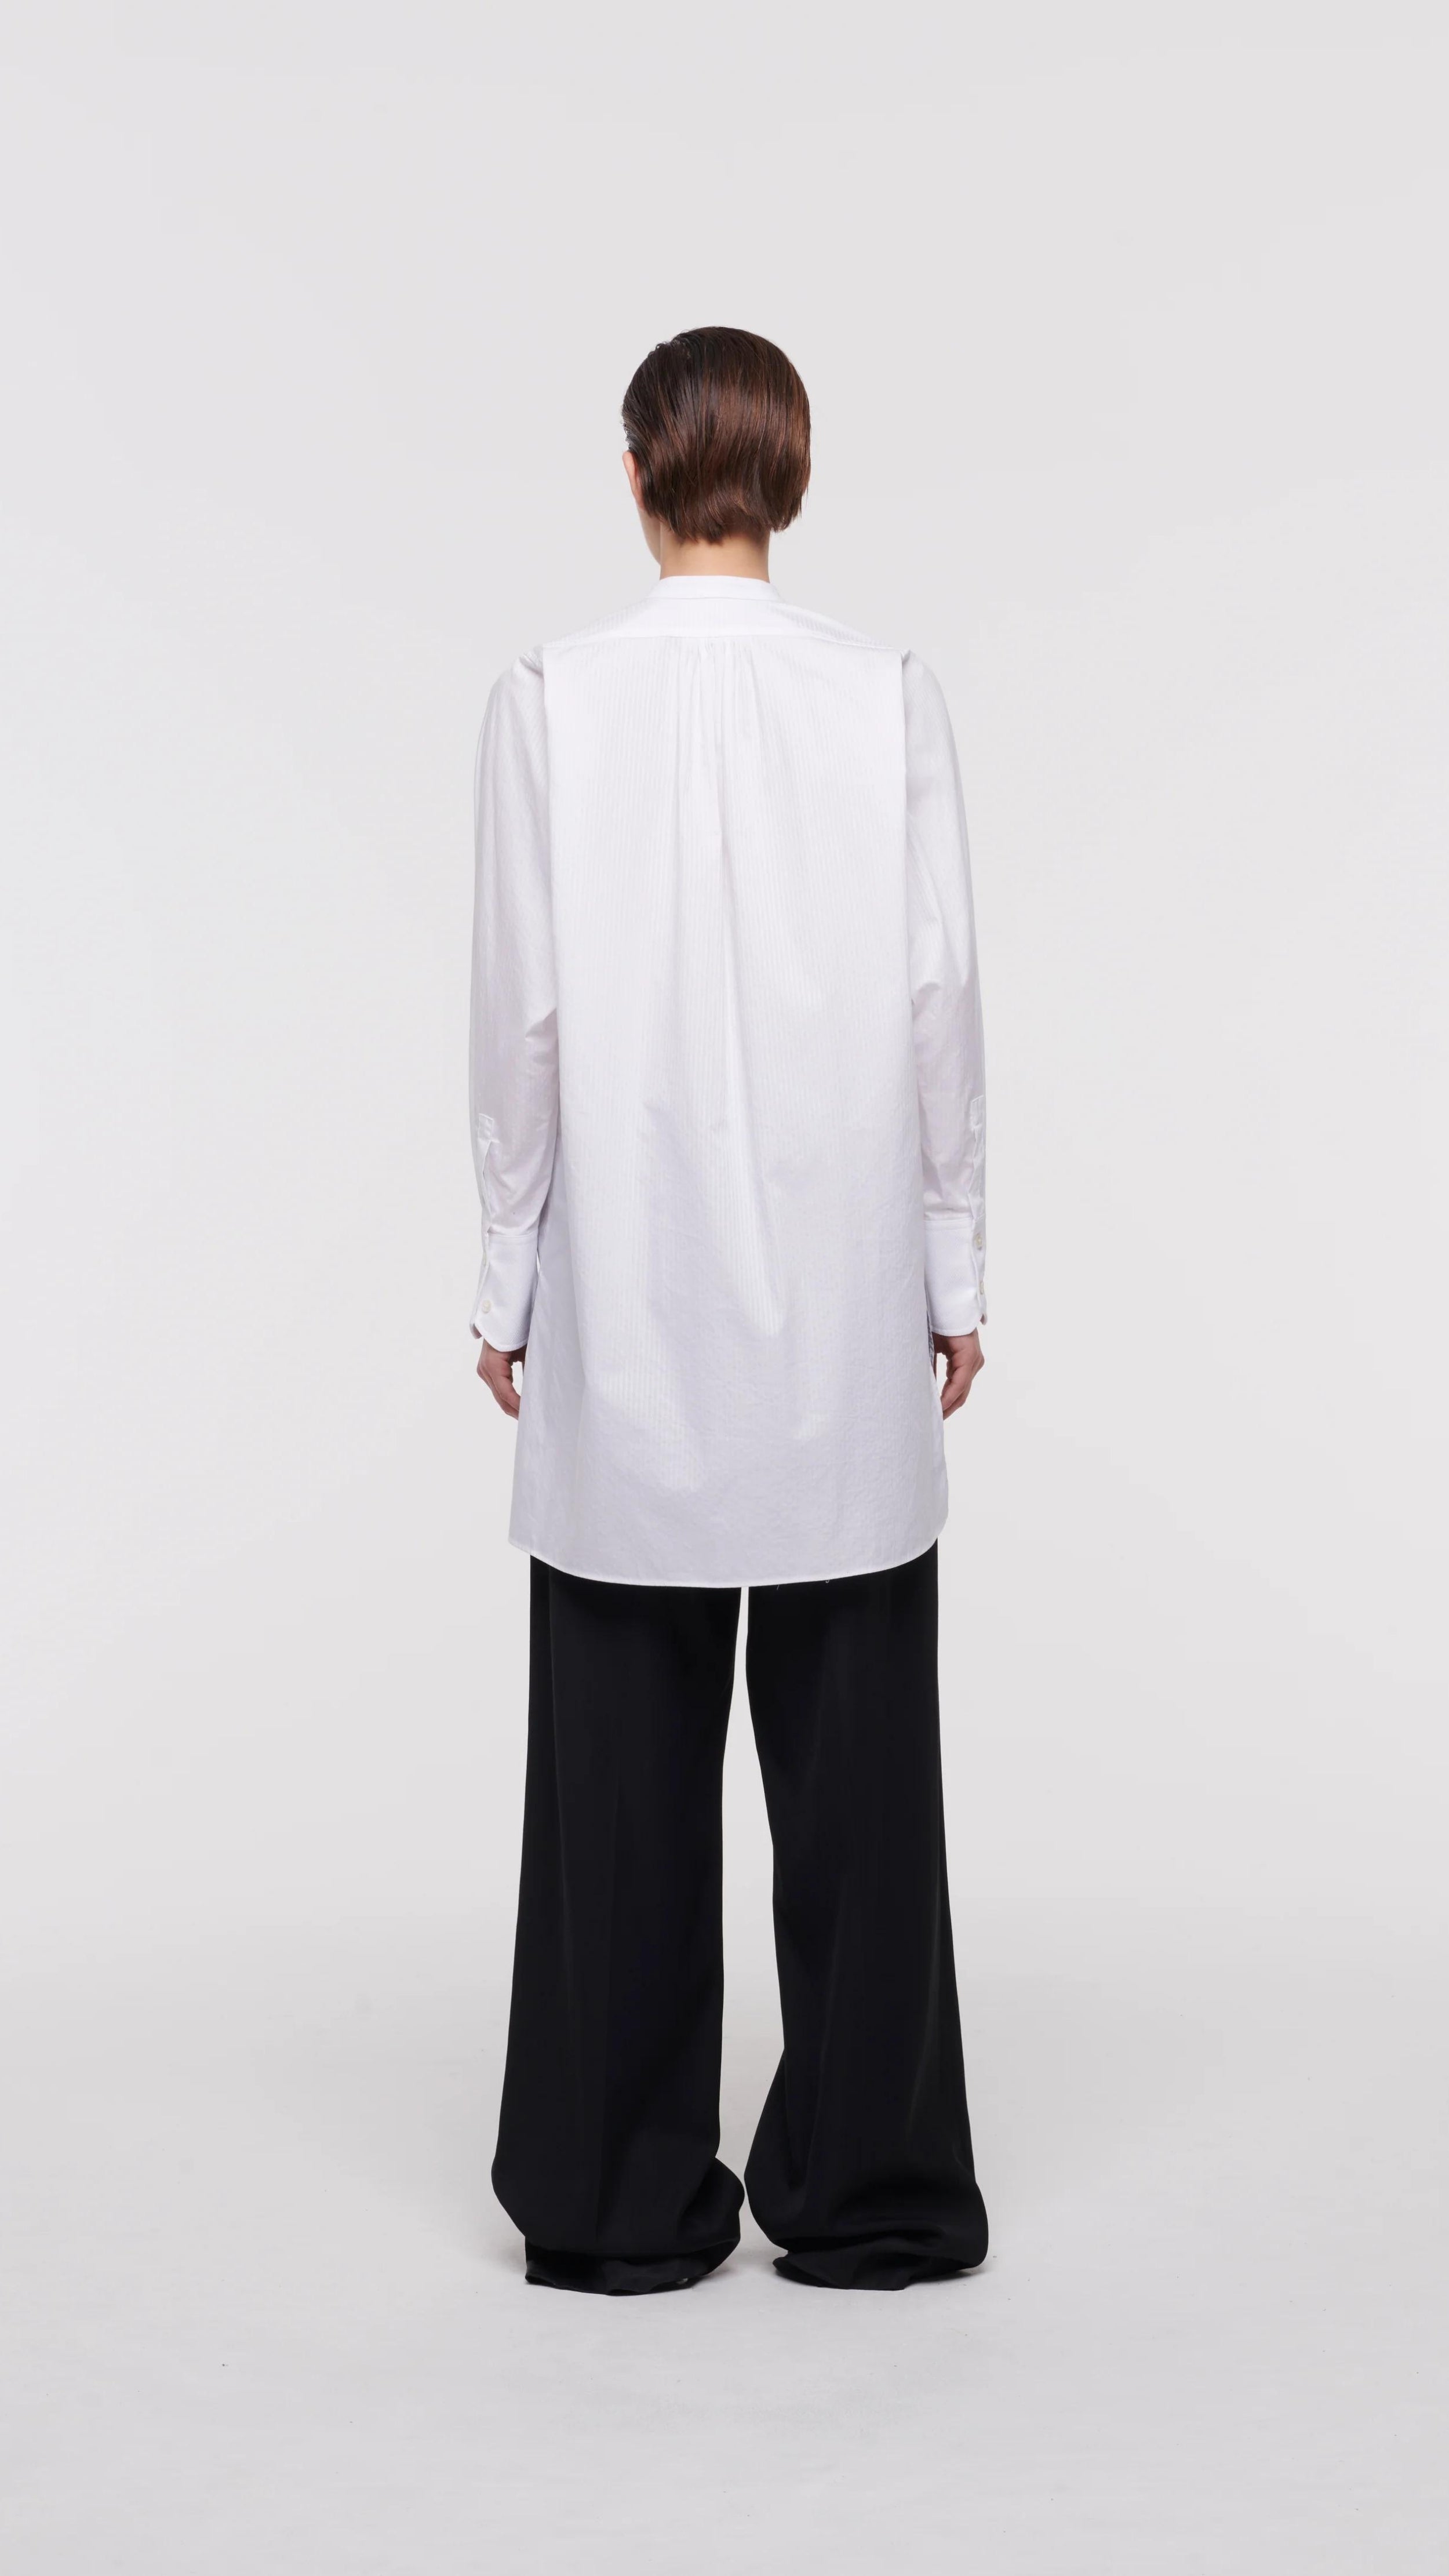 Plan C White Sartorial Poplin Shirt. Classic with a twist long white poplin blouse with front buttons. An added black ribbon detail in the front. Oversized cuffs at the long sleeves. Product photo shown from the back.